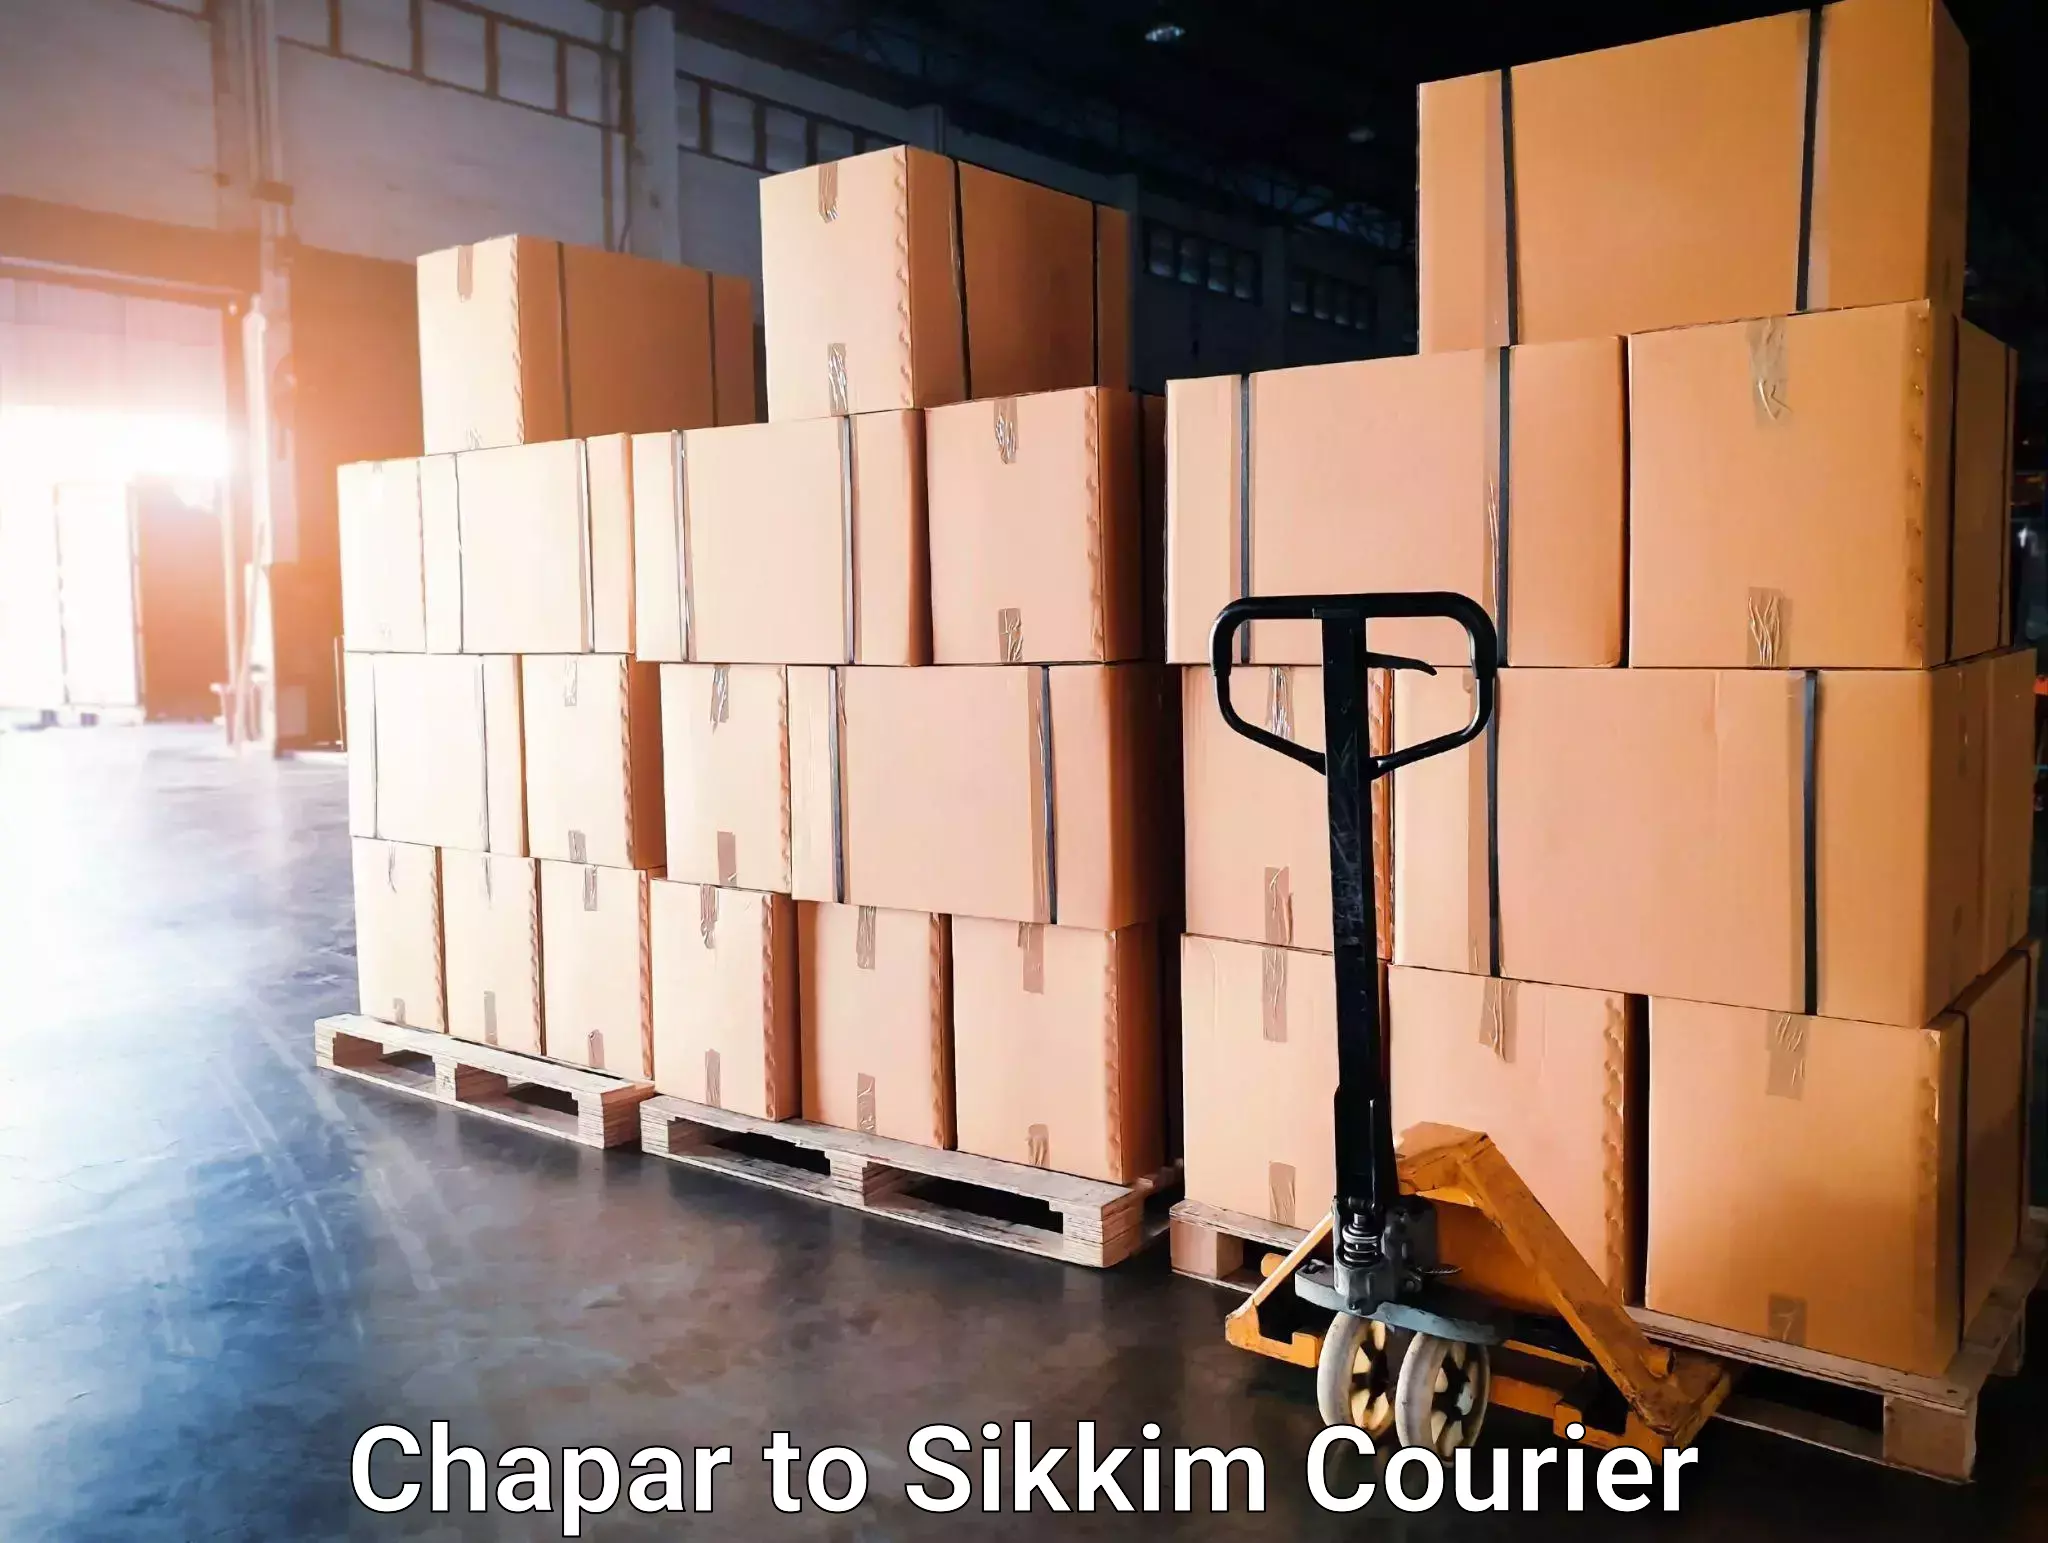 Courier service innovation Chapar to Sikkim